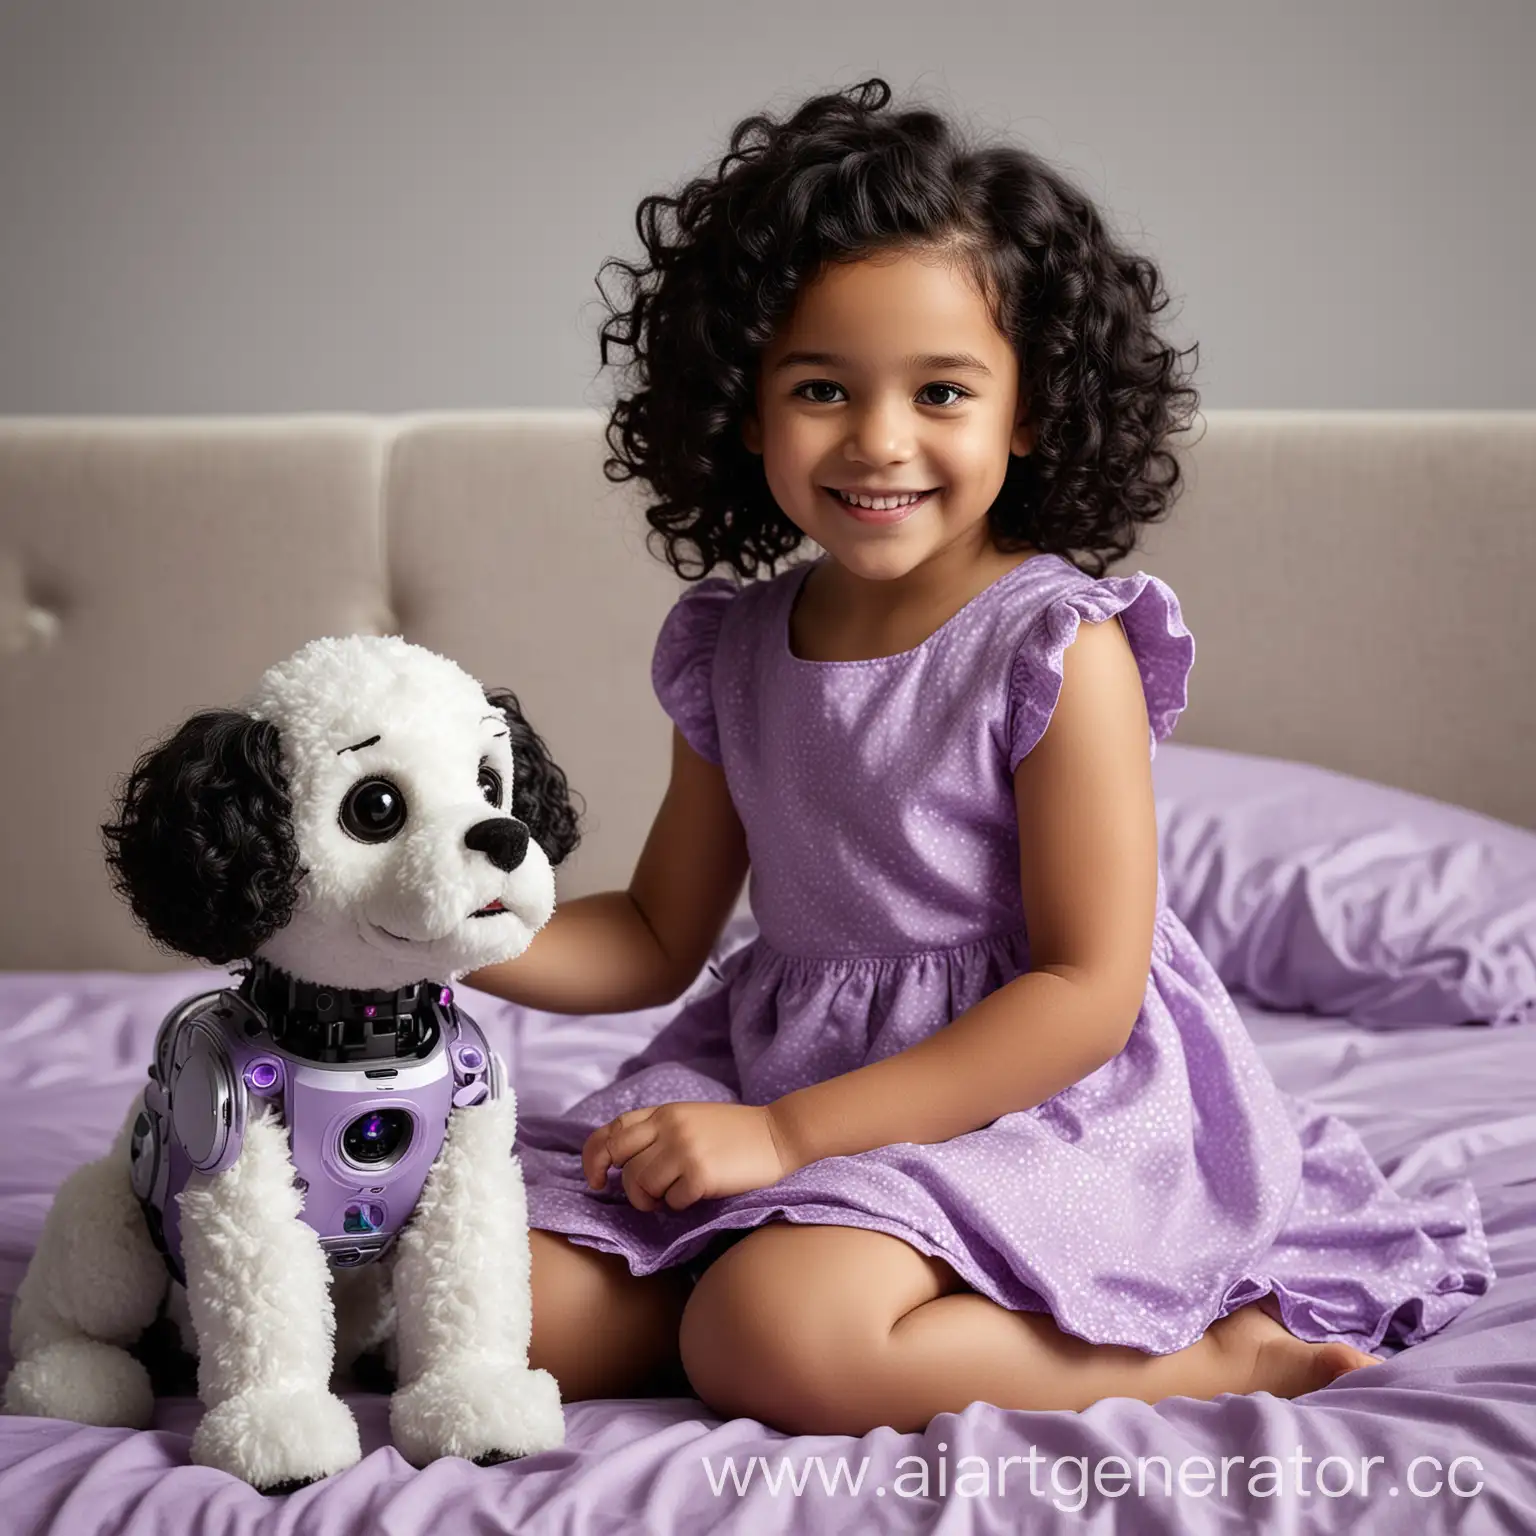 Young-Girl-in-Purple-Dress-Playing-with-Robotic-Dog-on-Bed